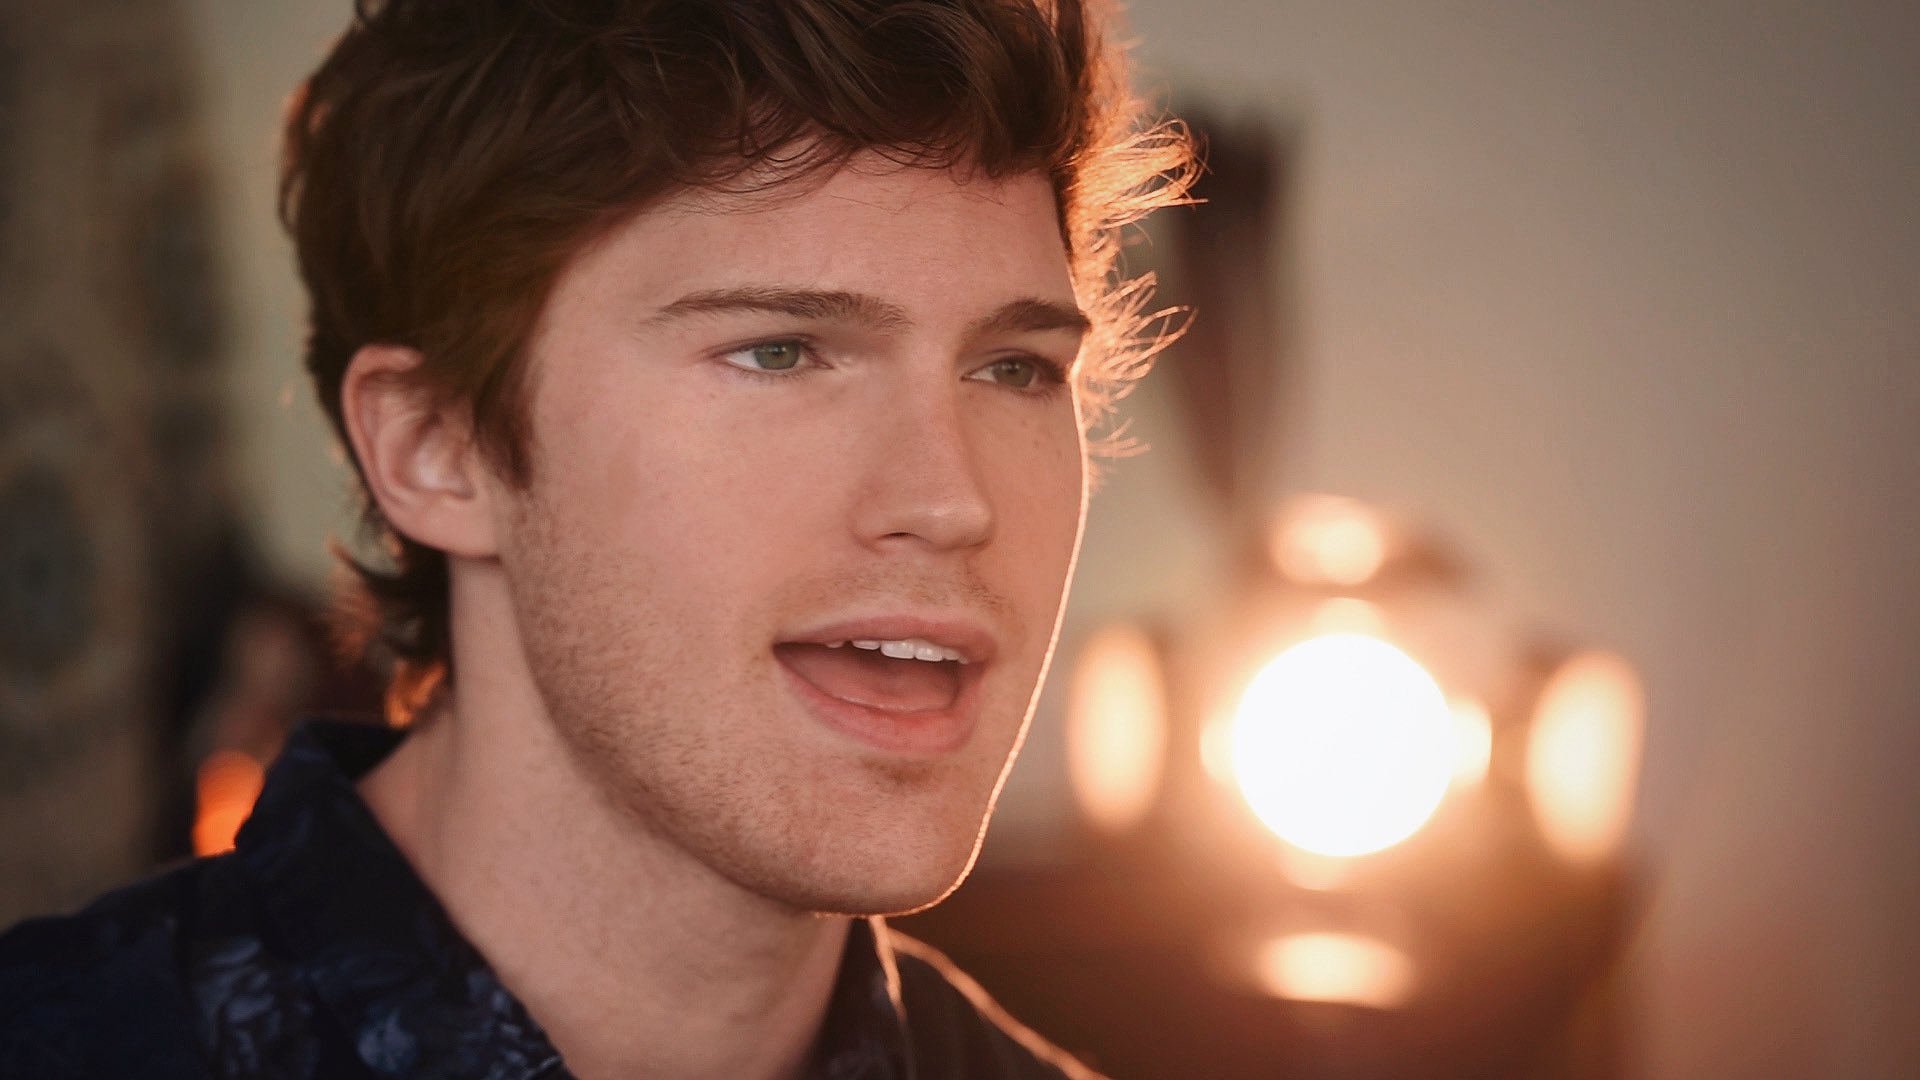 Tanner Patrick VIDEO: Watch my version of Perfect. Enjoy!